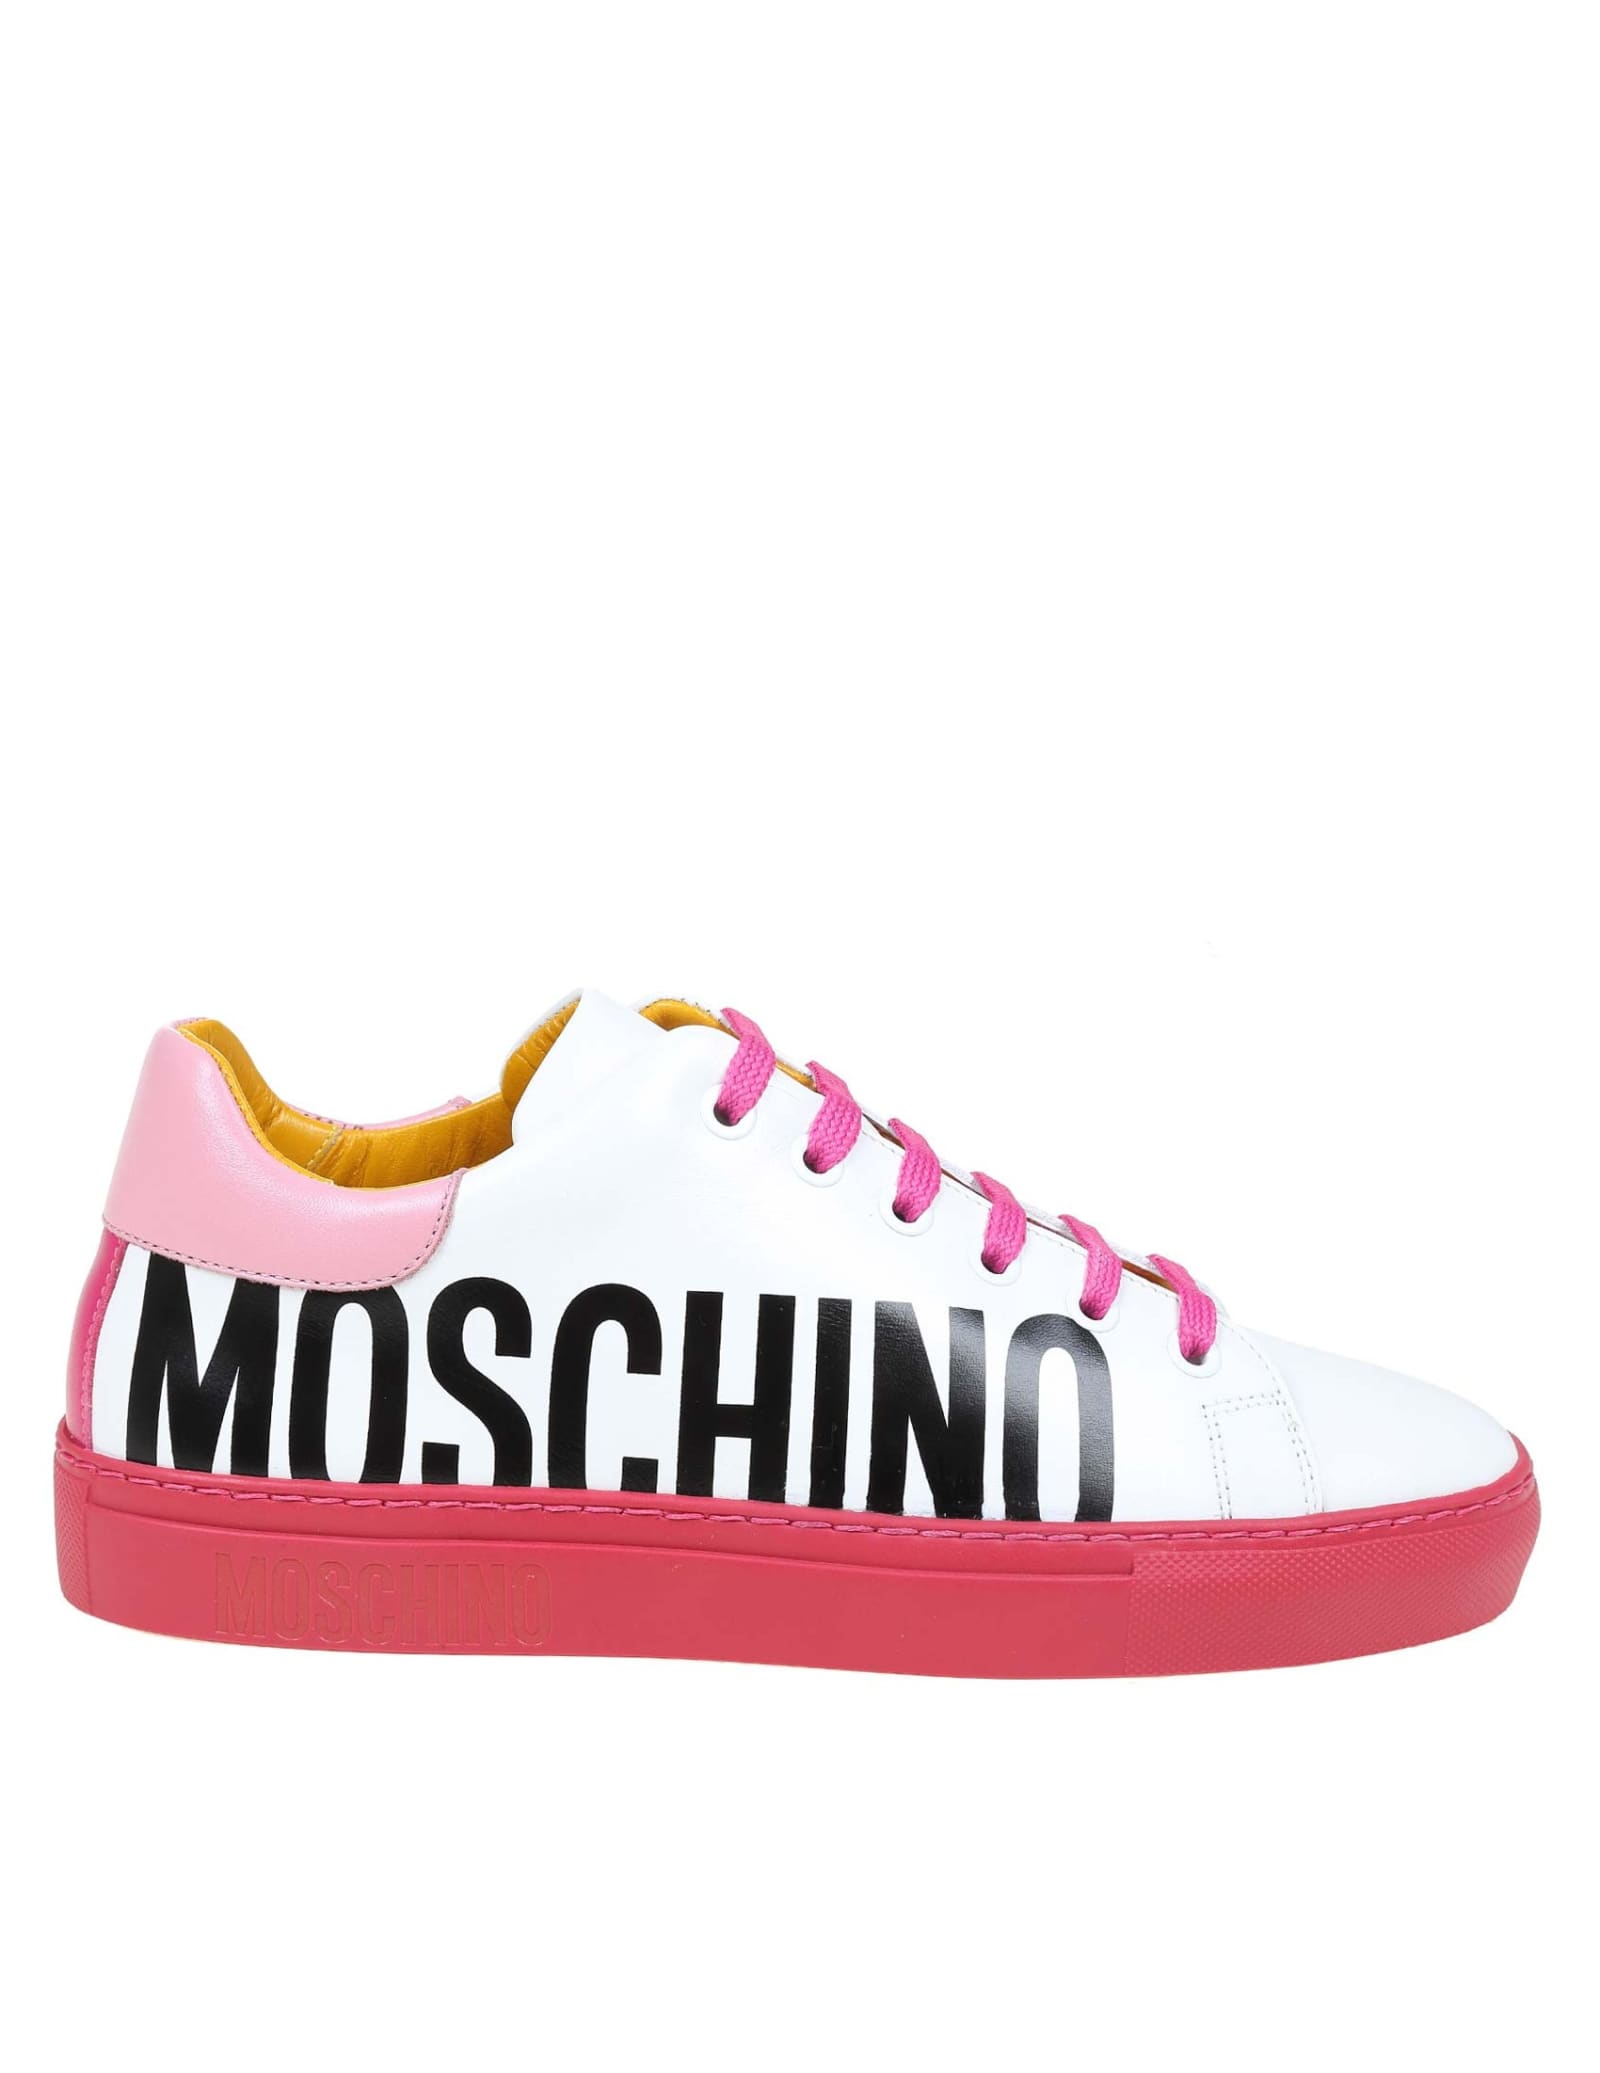 Buy Moschino Leather Sneakers With Logo online, shop Moschino shoes with free shipping